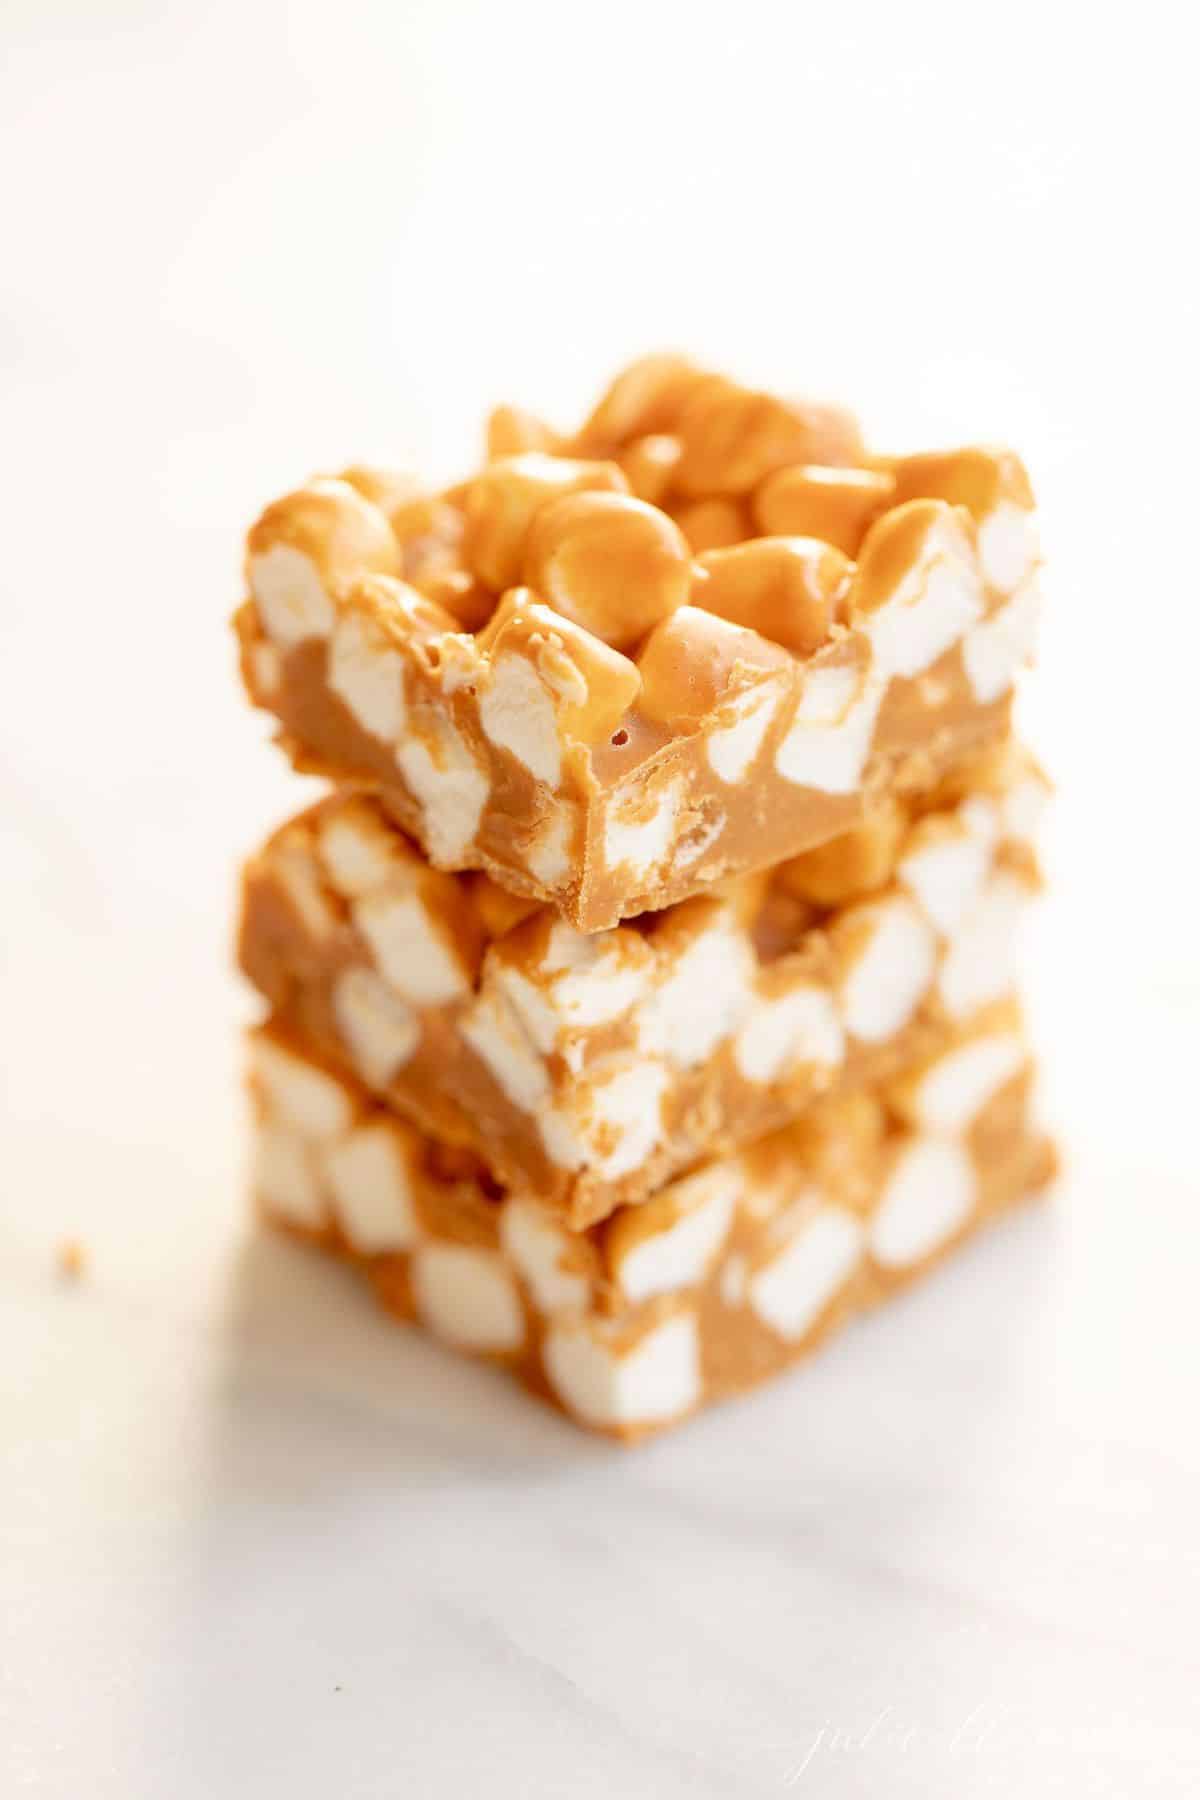 Stack of three homemade no bake butterscotch candy bars on a marble surface.